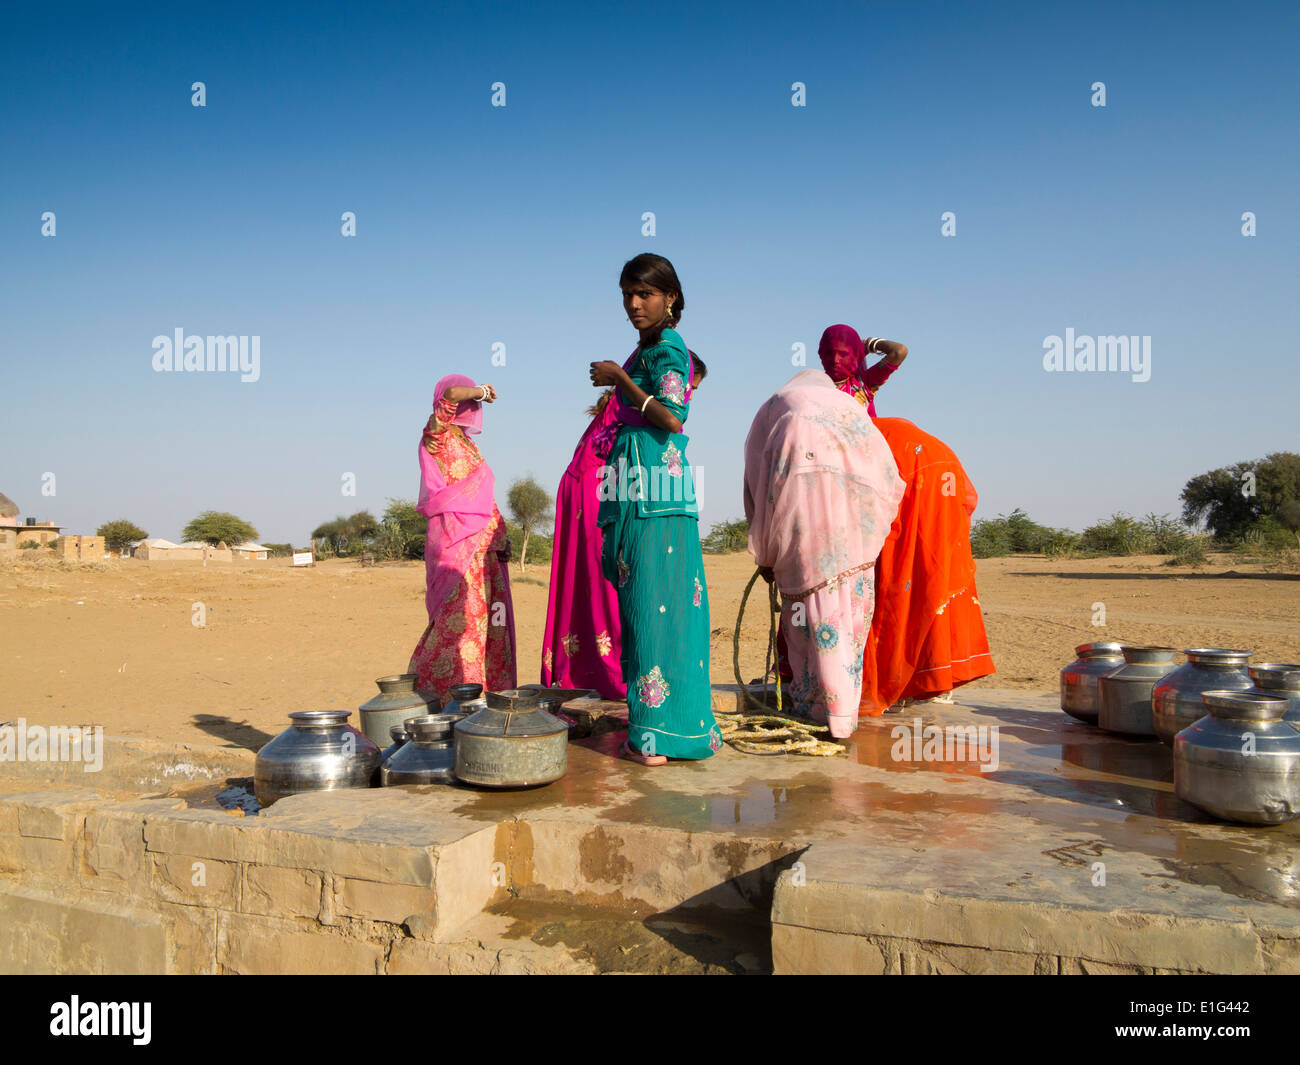 India, Rajasthan, Jaisalmer, Thar Desert, Khuri, colourfully dressed women collecting water from village well Stock Photo